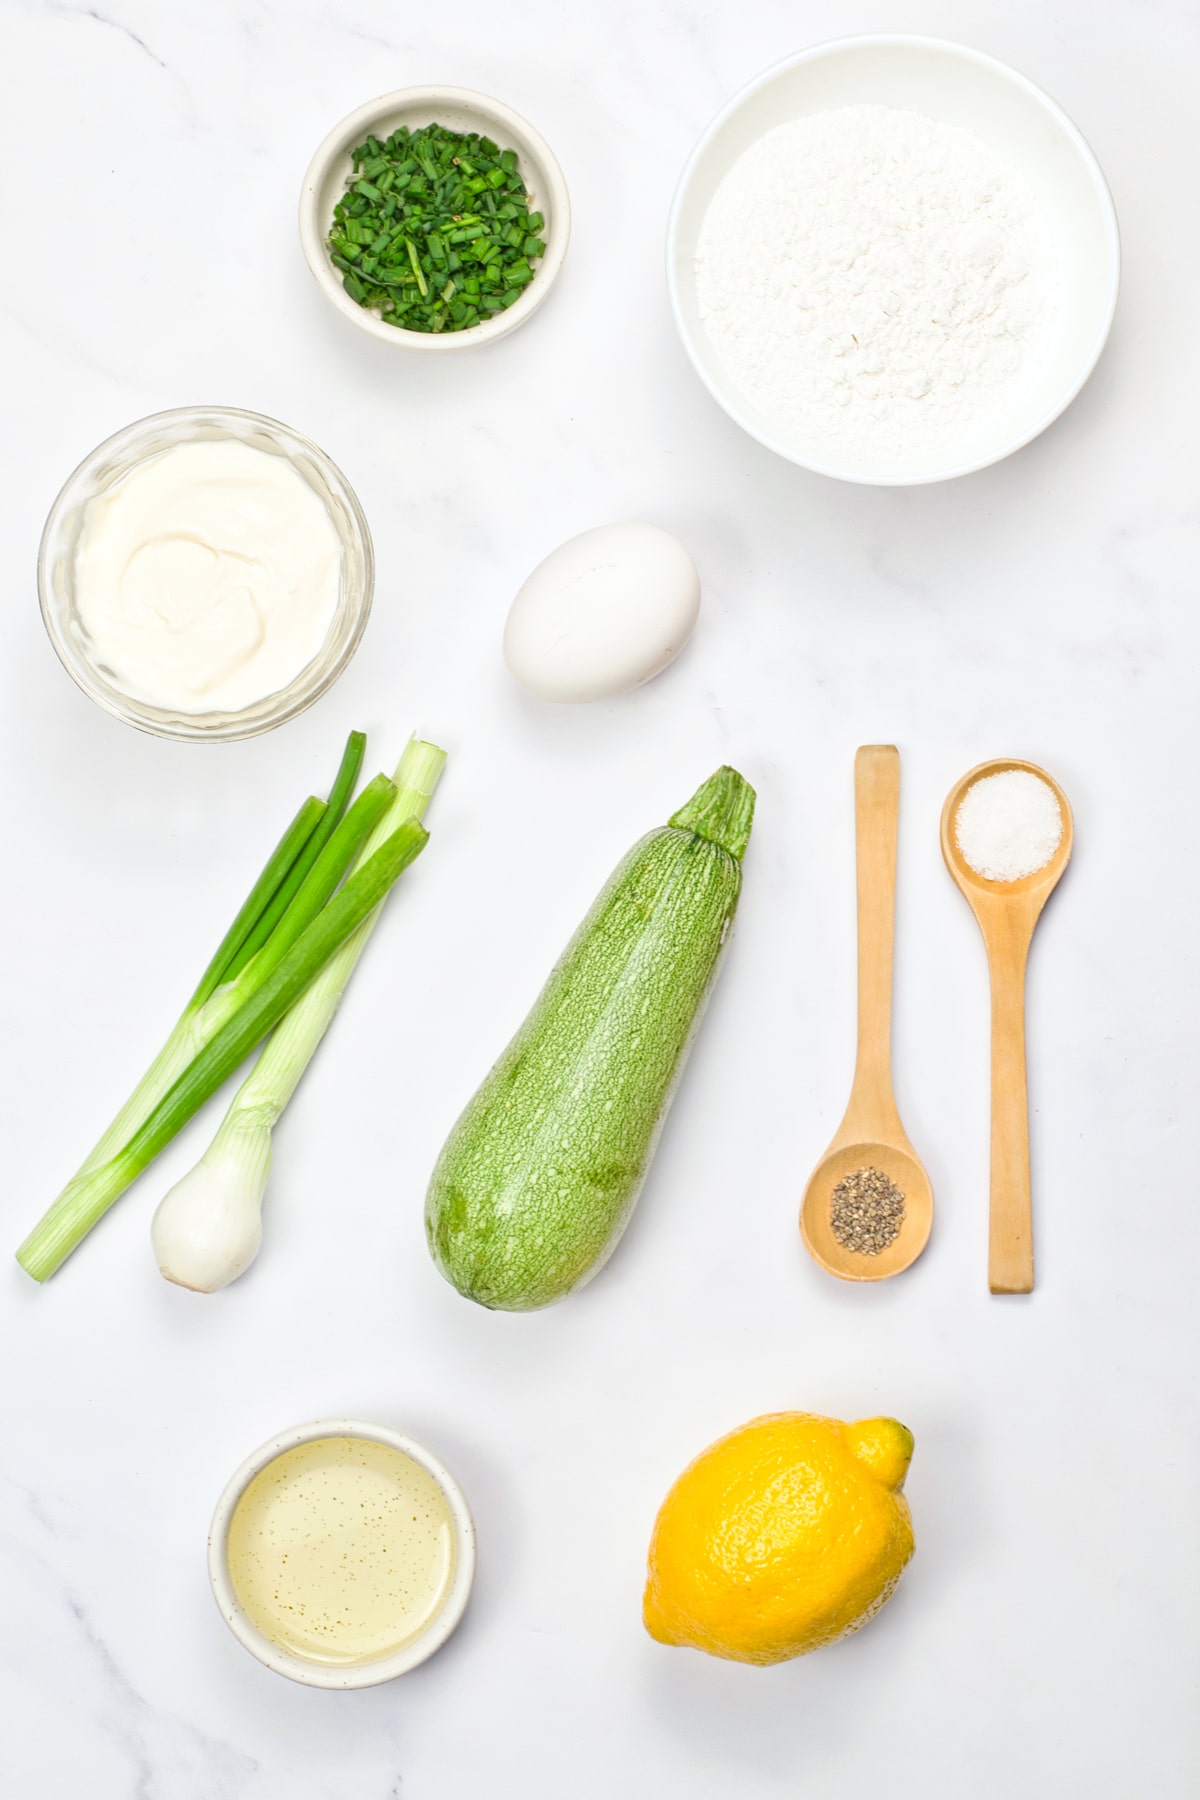 Ingredients for Zucchini Fritters include zucchini, eggs, spring onions, lemon, rice flour, black pepper, salt, chives, vegetable oil, and vegan sour cream